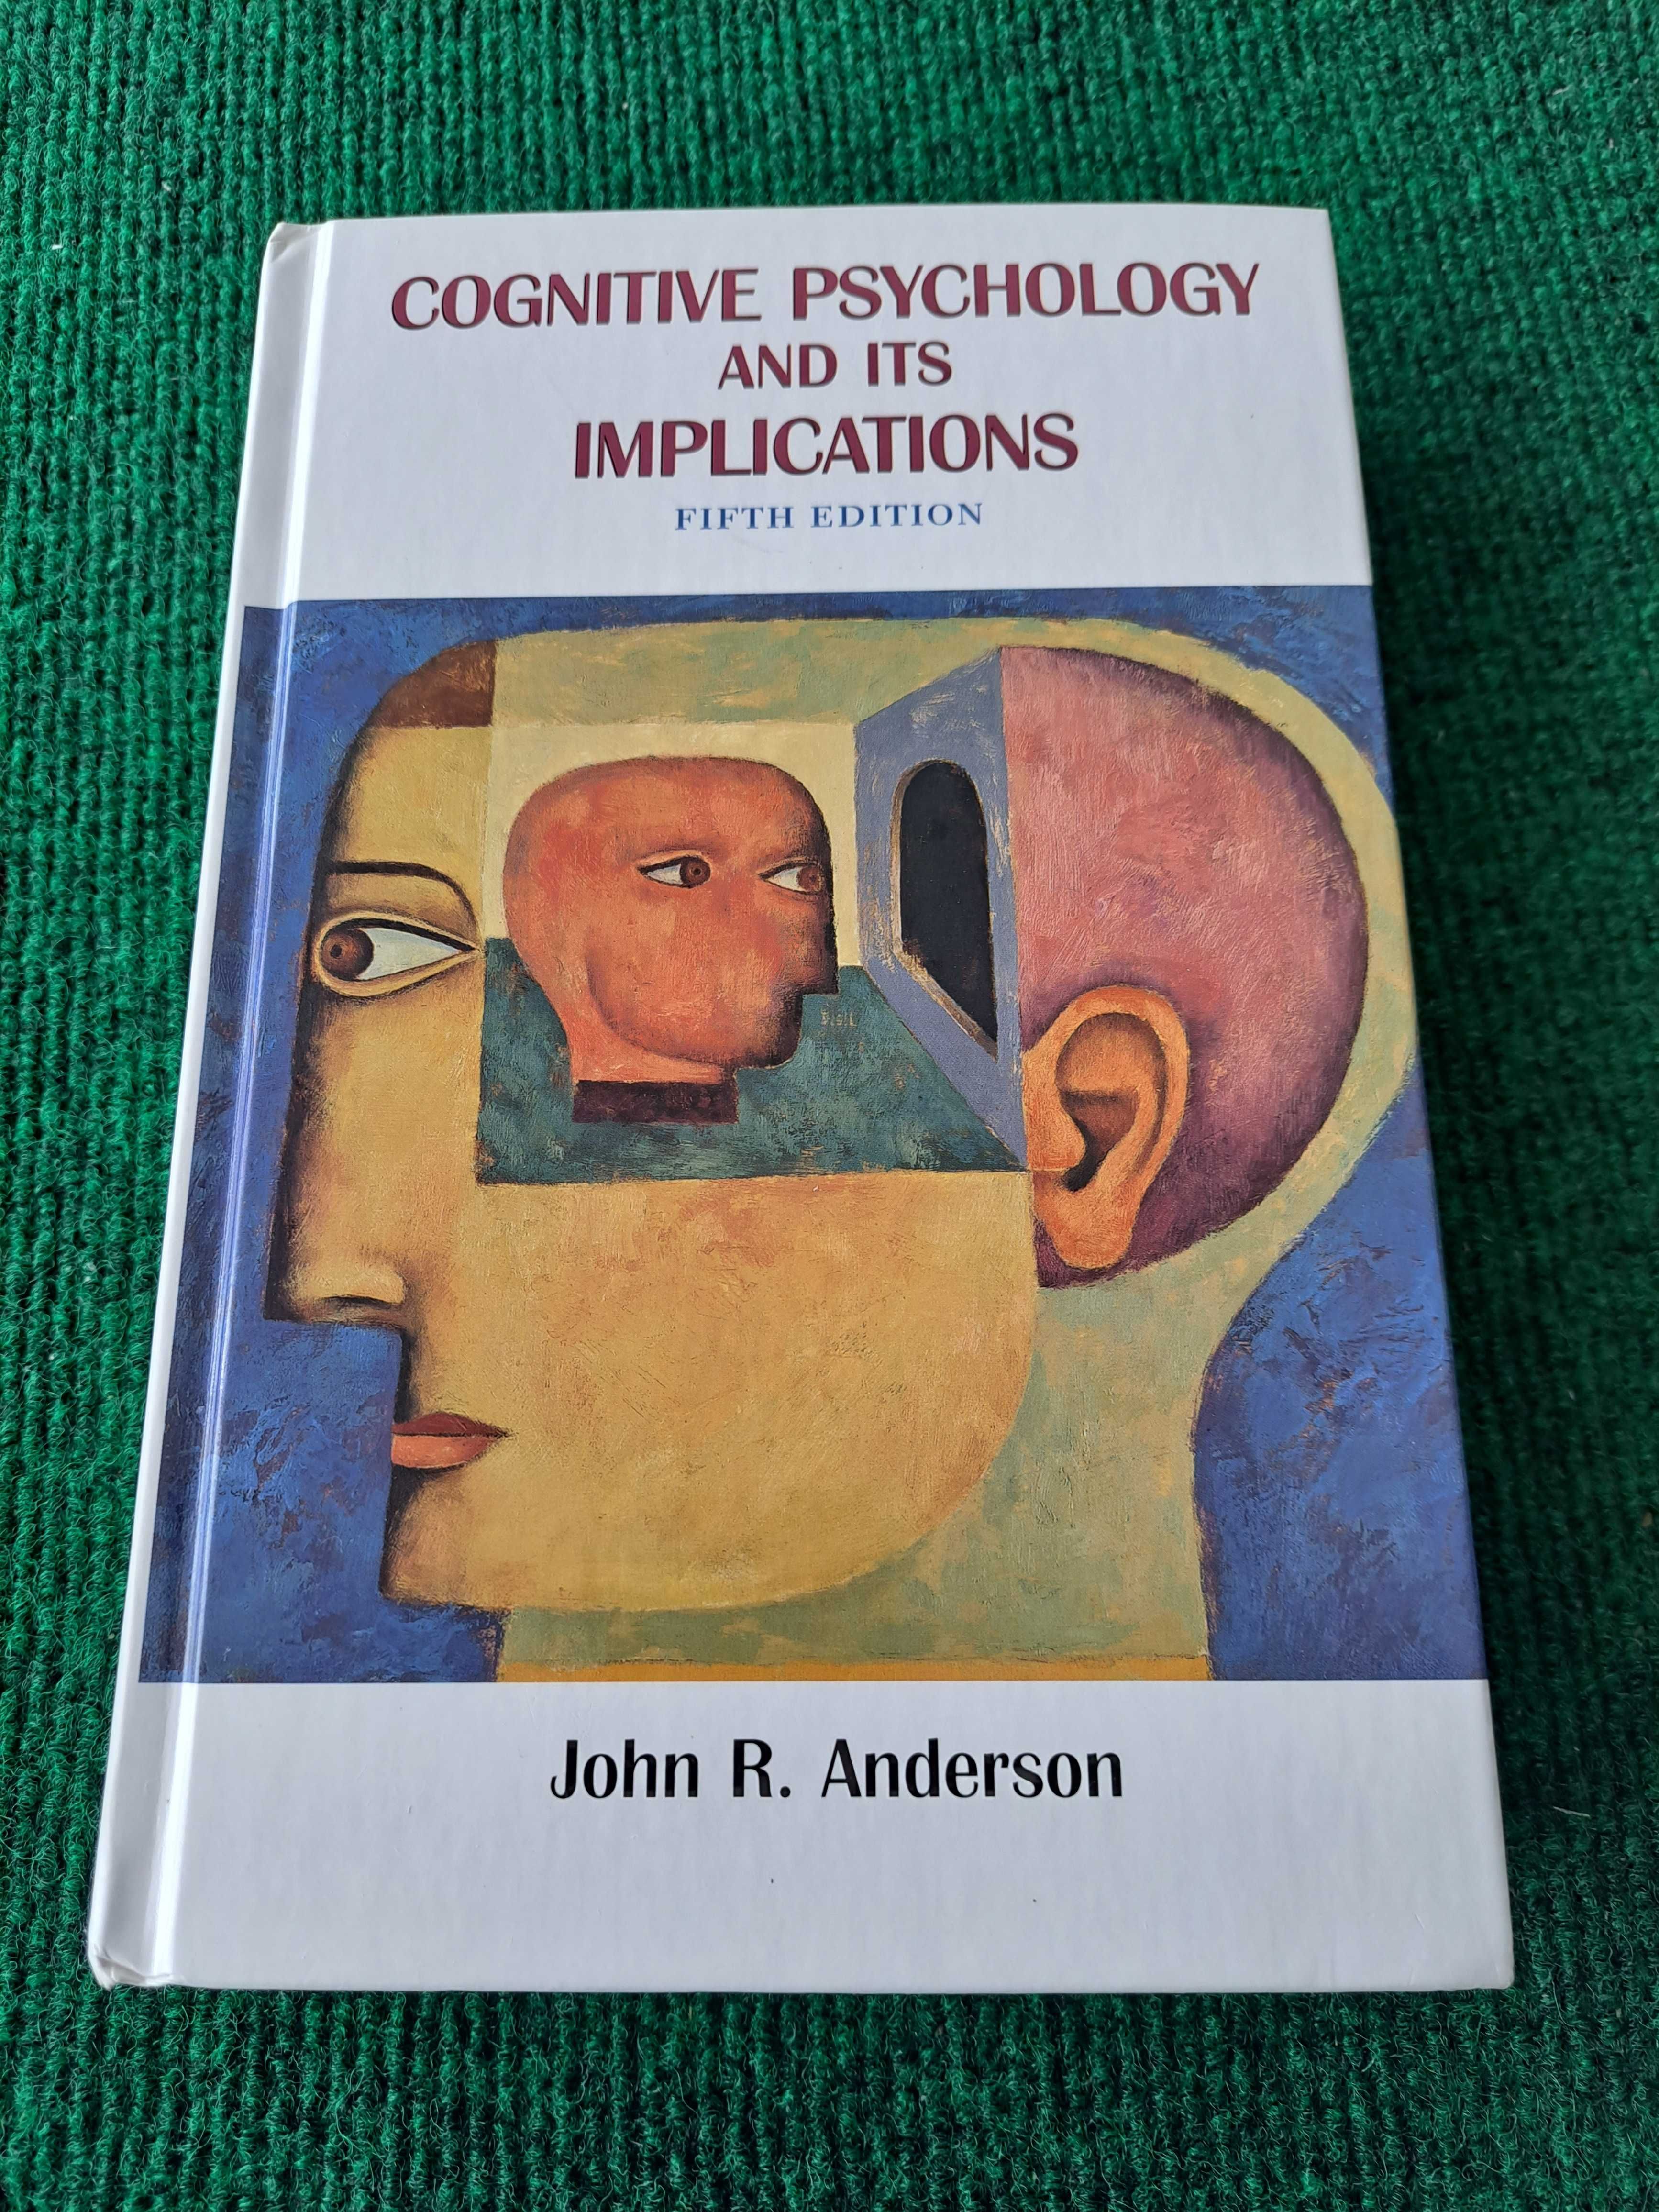 Cognitive Psychology and its Implications - John R. Anderson